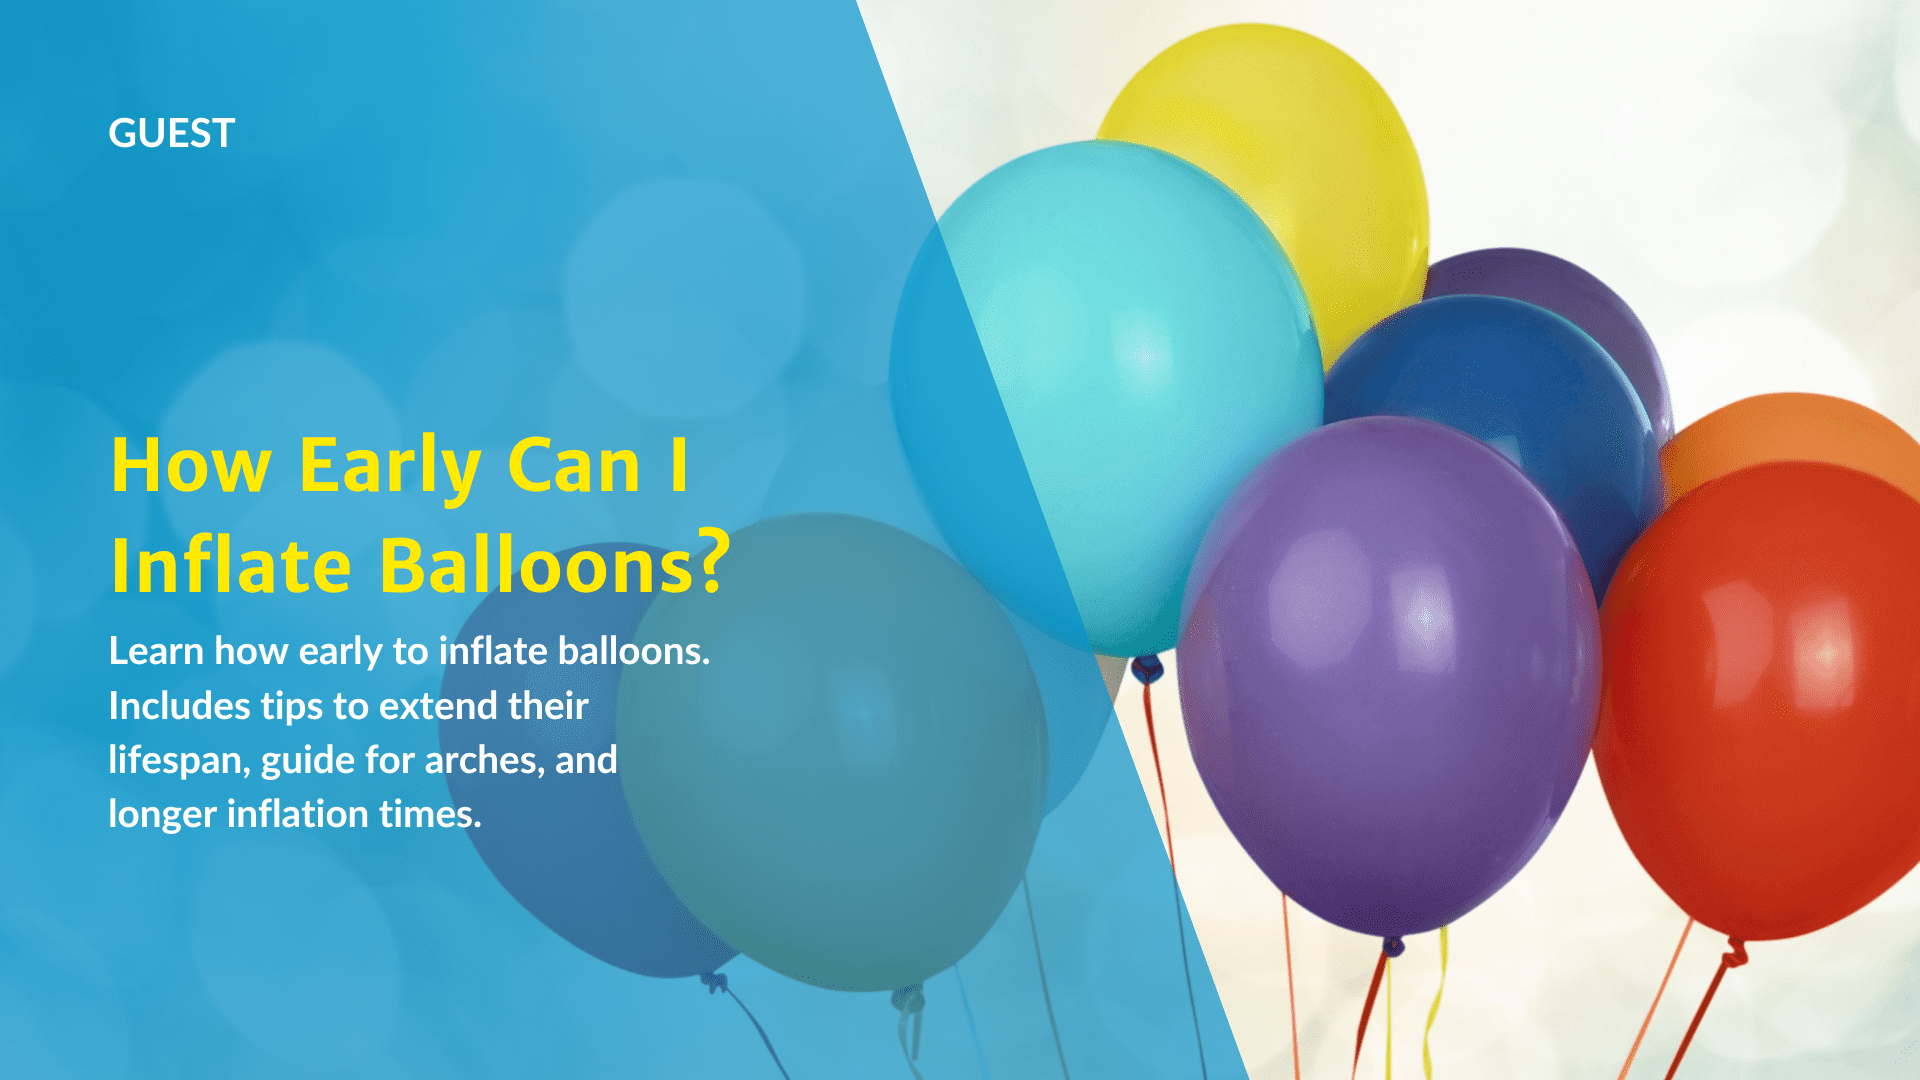 How Early Can I Inflate Balloons?